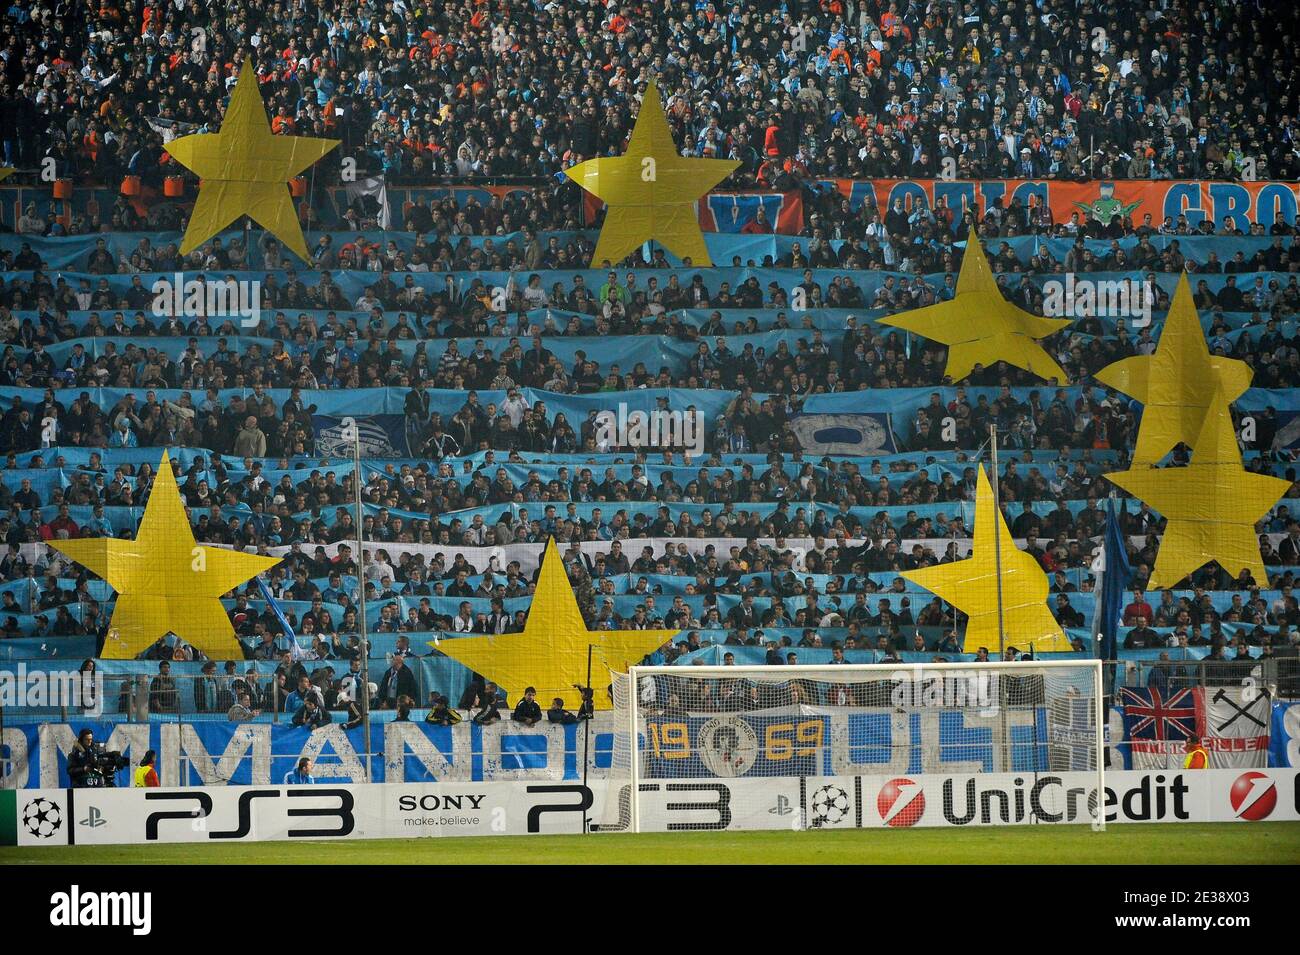 Marseille's fans during the UEFA Champions League Soccer match, Group F, Olympique de Marseille vs Chelsea FC at the Stade Velodrome in Marseille, France on December 8, 2010 in Marseille, France. Marseille won 1-0. Photo by Stephane Reix/ABACAPRESS.COM Stock Photo